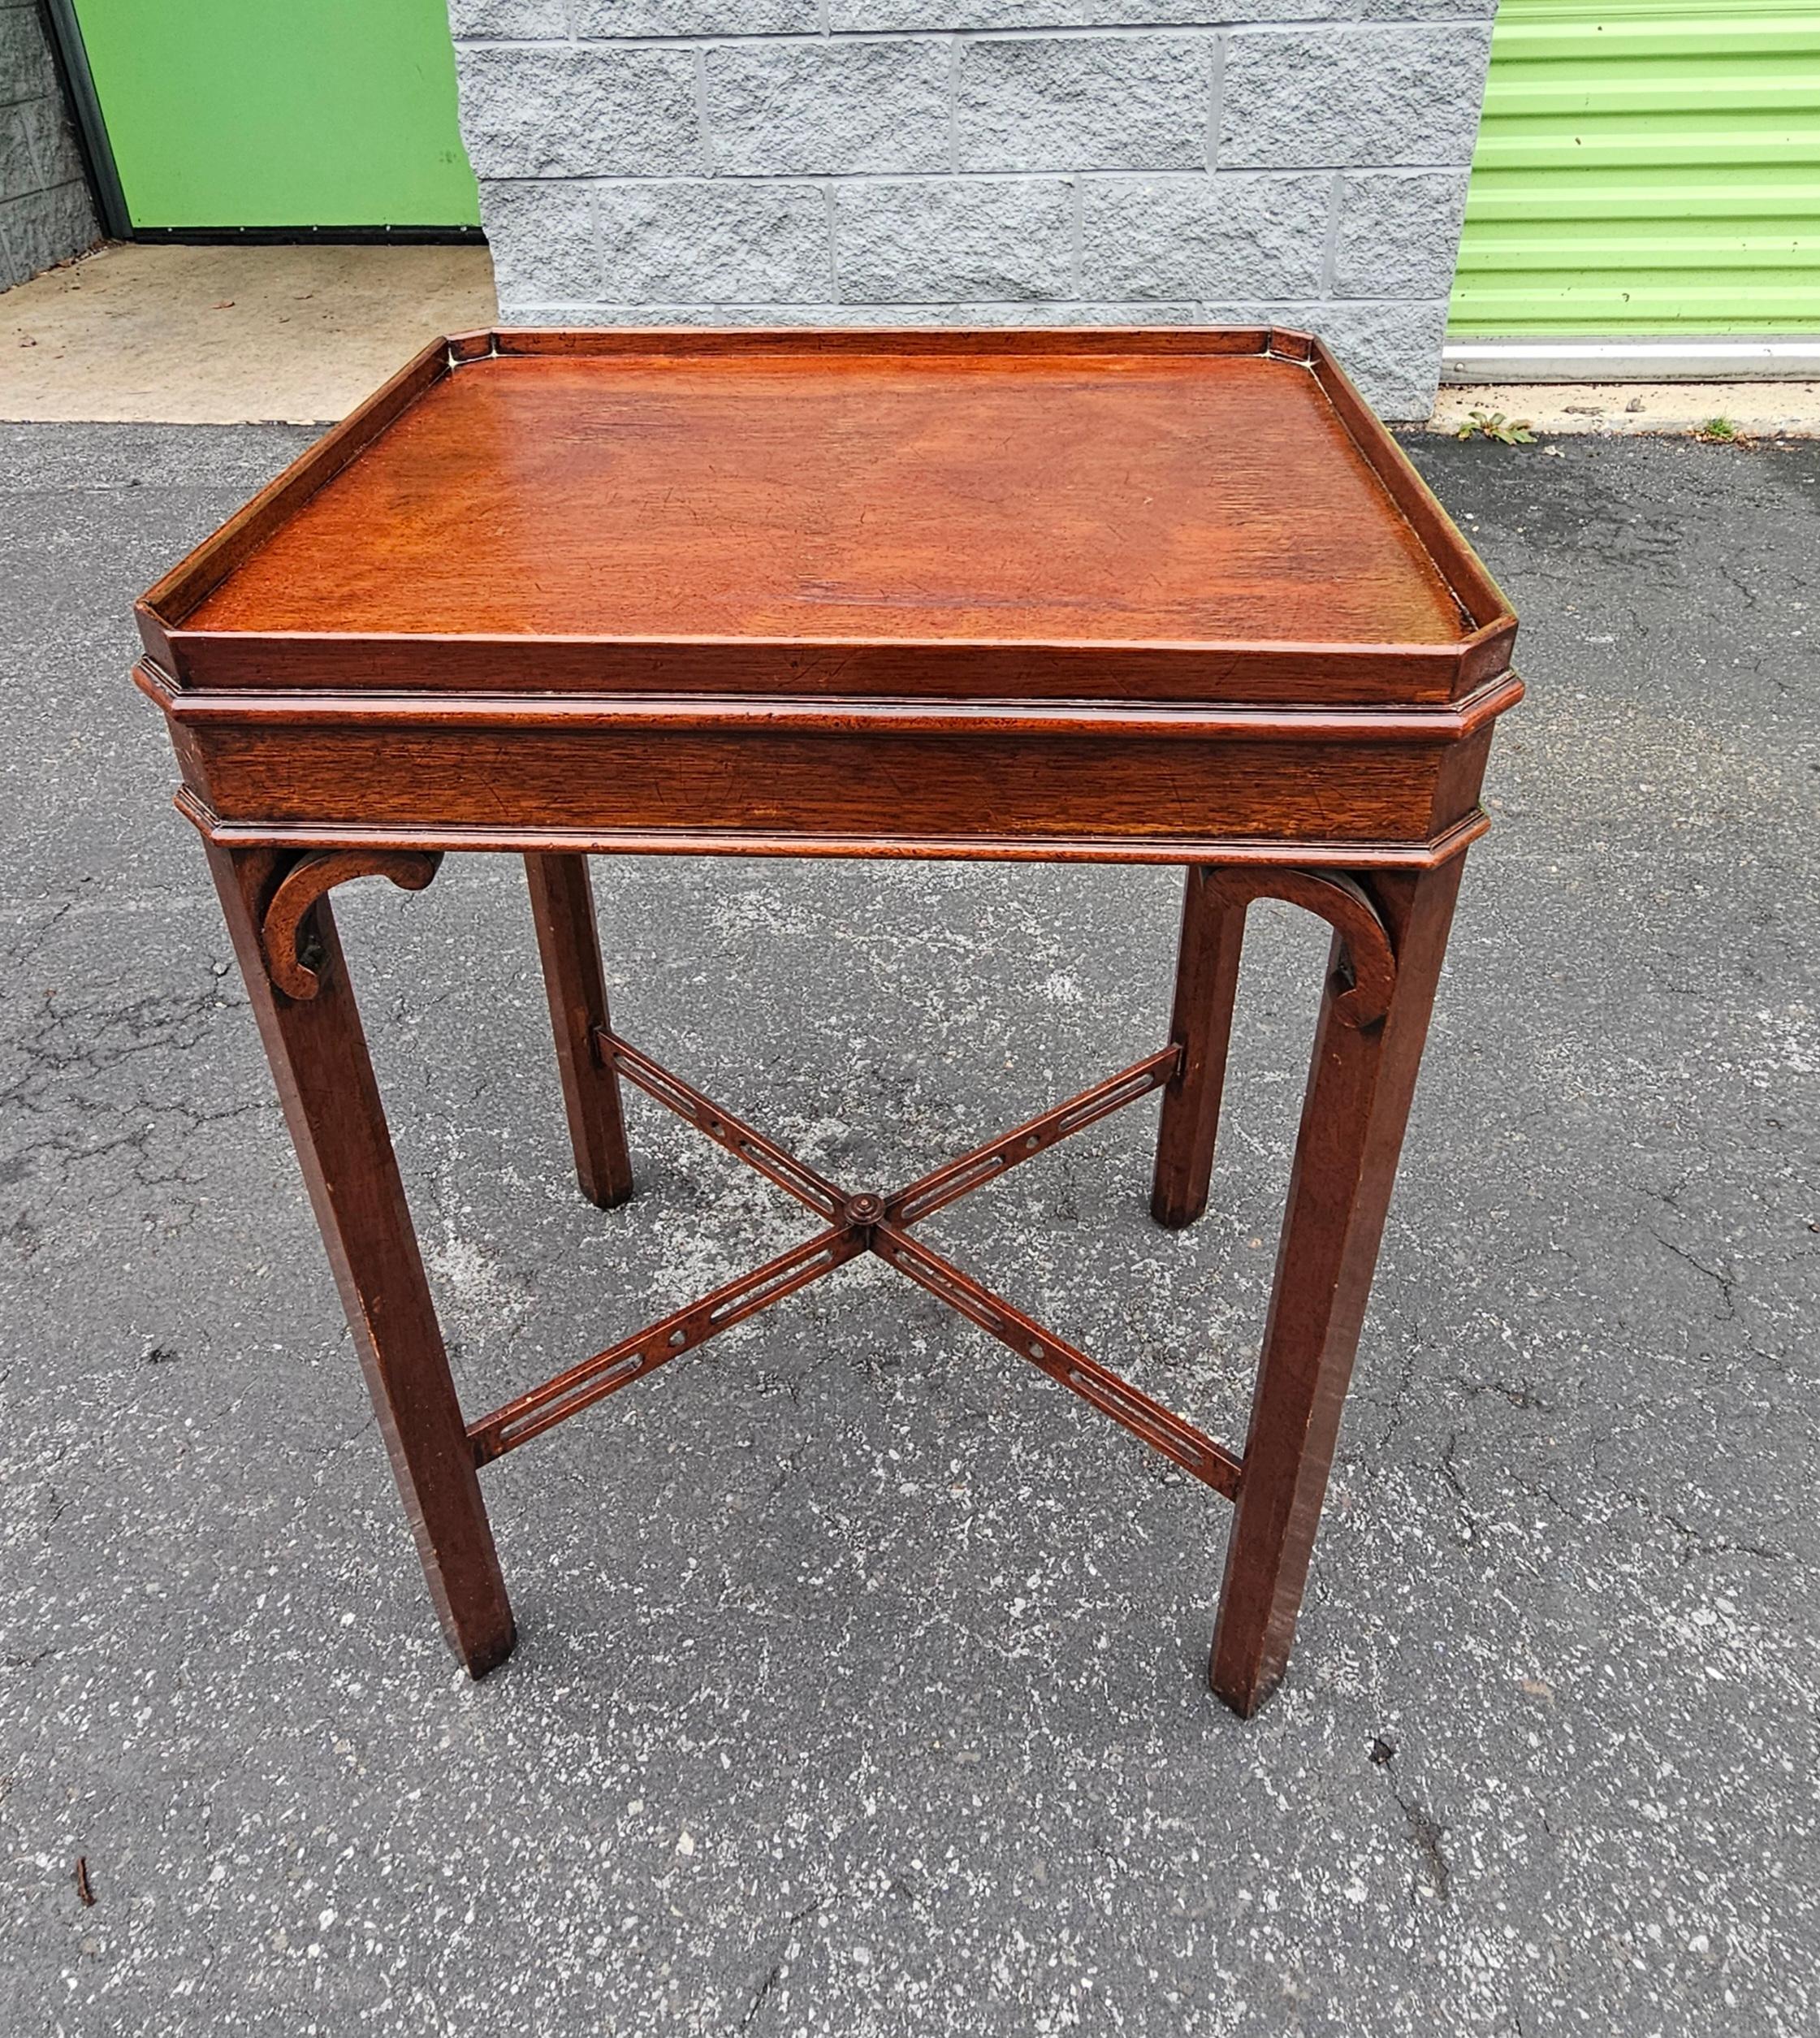 A 20th Century Mahogany with cross Stretcher leg support with solid Gallery top Side Table. Measures 19